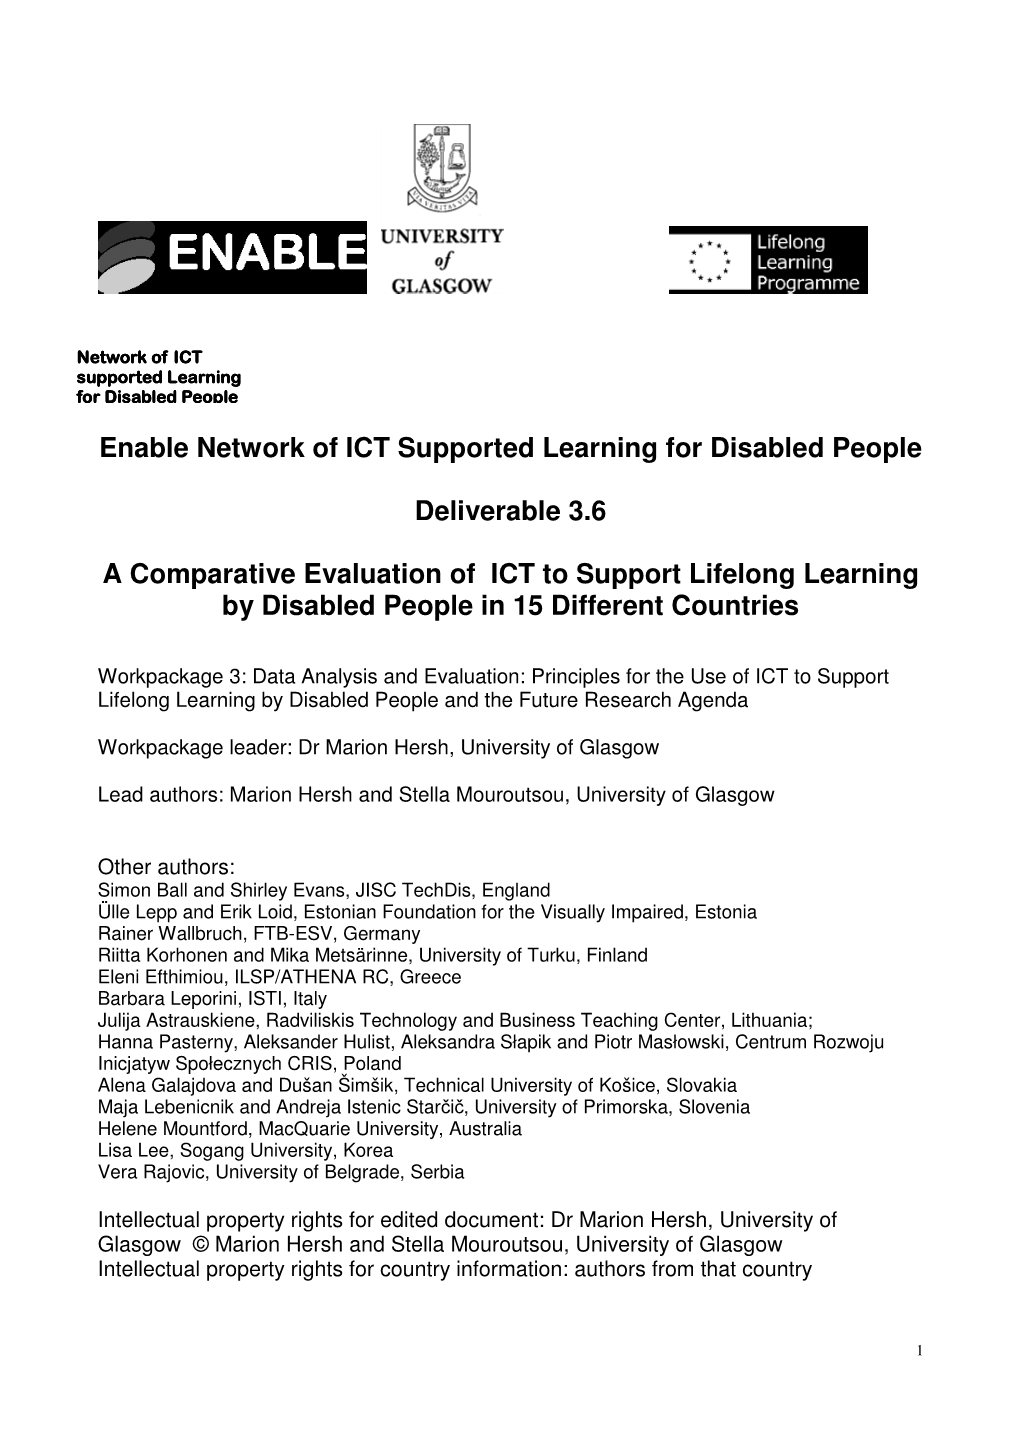 A Comparative Evaluation of ICT to Support Lifelong Learning by Disabled People in 15 Different Countries